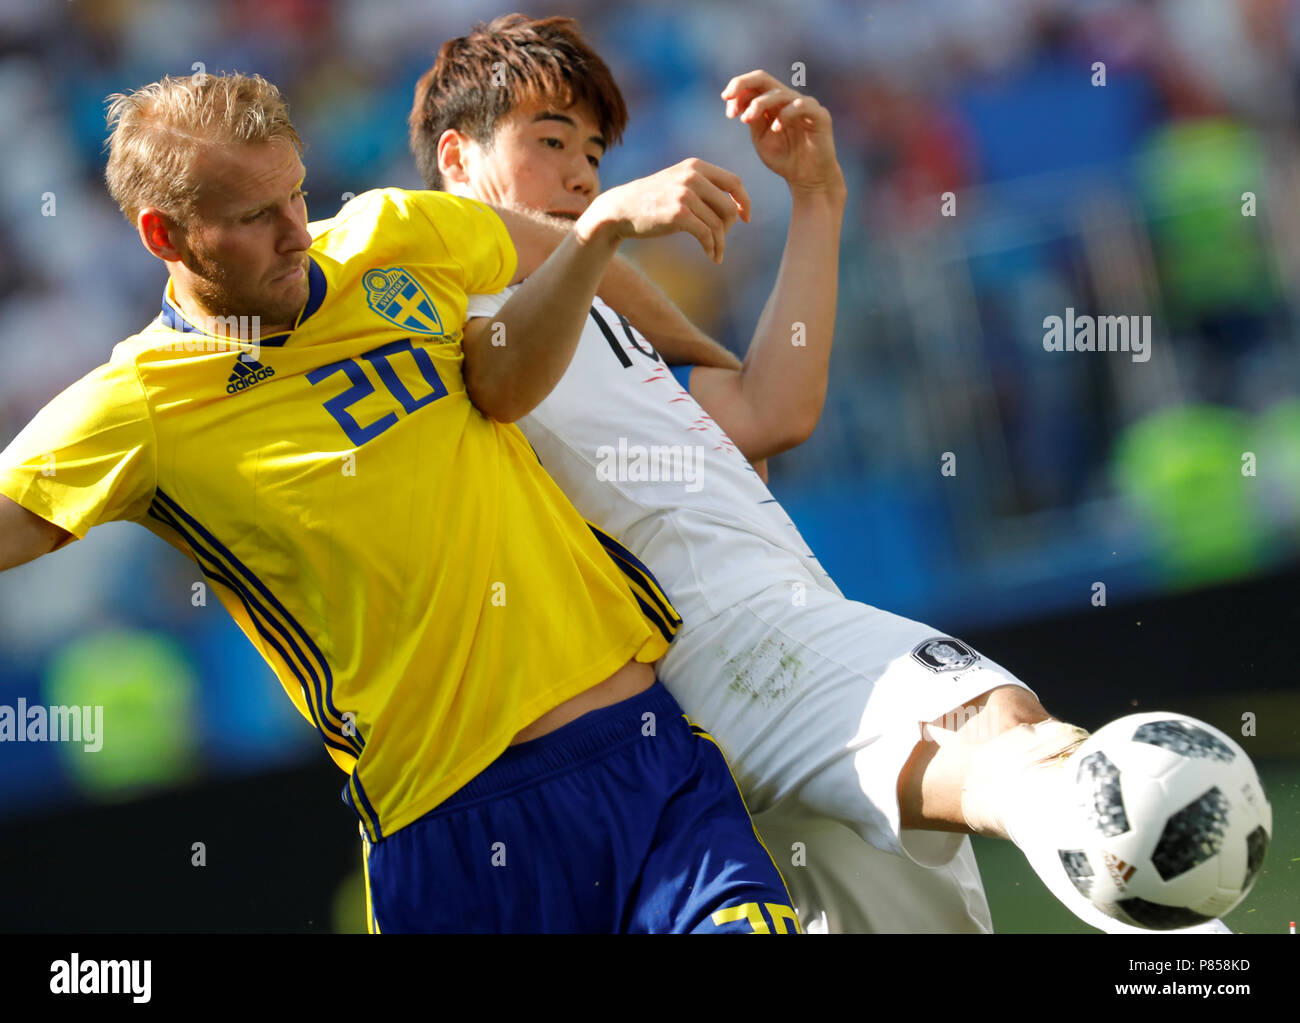 NIZHNY NOVGOROD, RUSSIA - JUNE 18: Ola Toivonen (L) of Sweden national team and Sungyueng Ki of Korea Republic national team vie for the ball during the 2018 FIFA World Cup Russia group F match between Sweden and Korea Republic at Nizhny Novgorod Stadium on June 18, 2018 in Nizhny Novgorod, Russia. Stock Photo